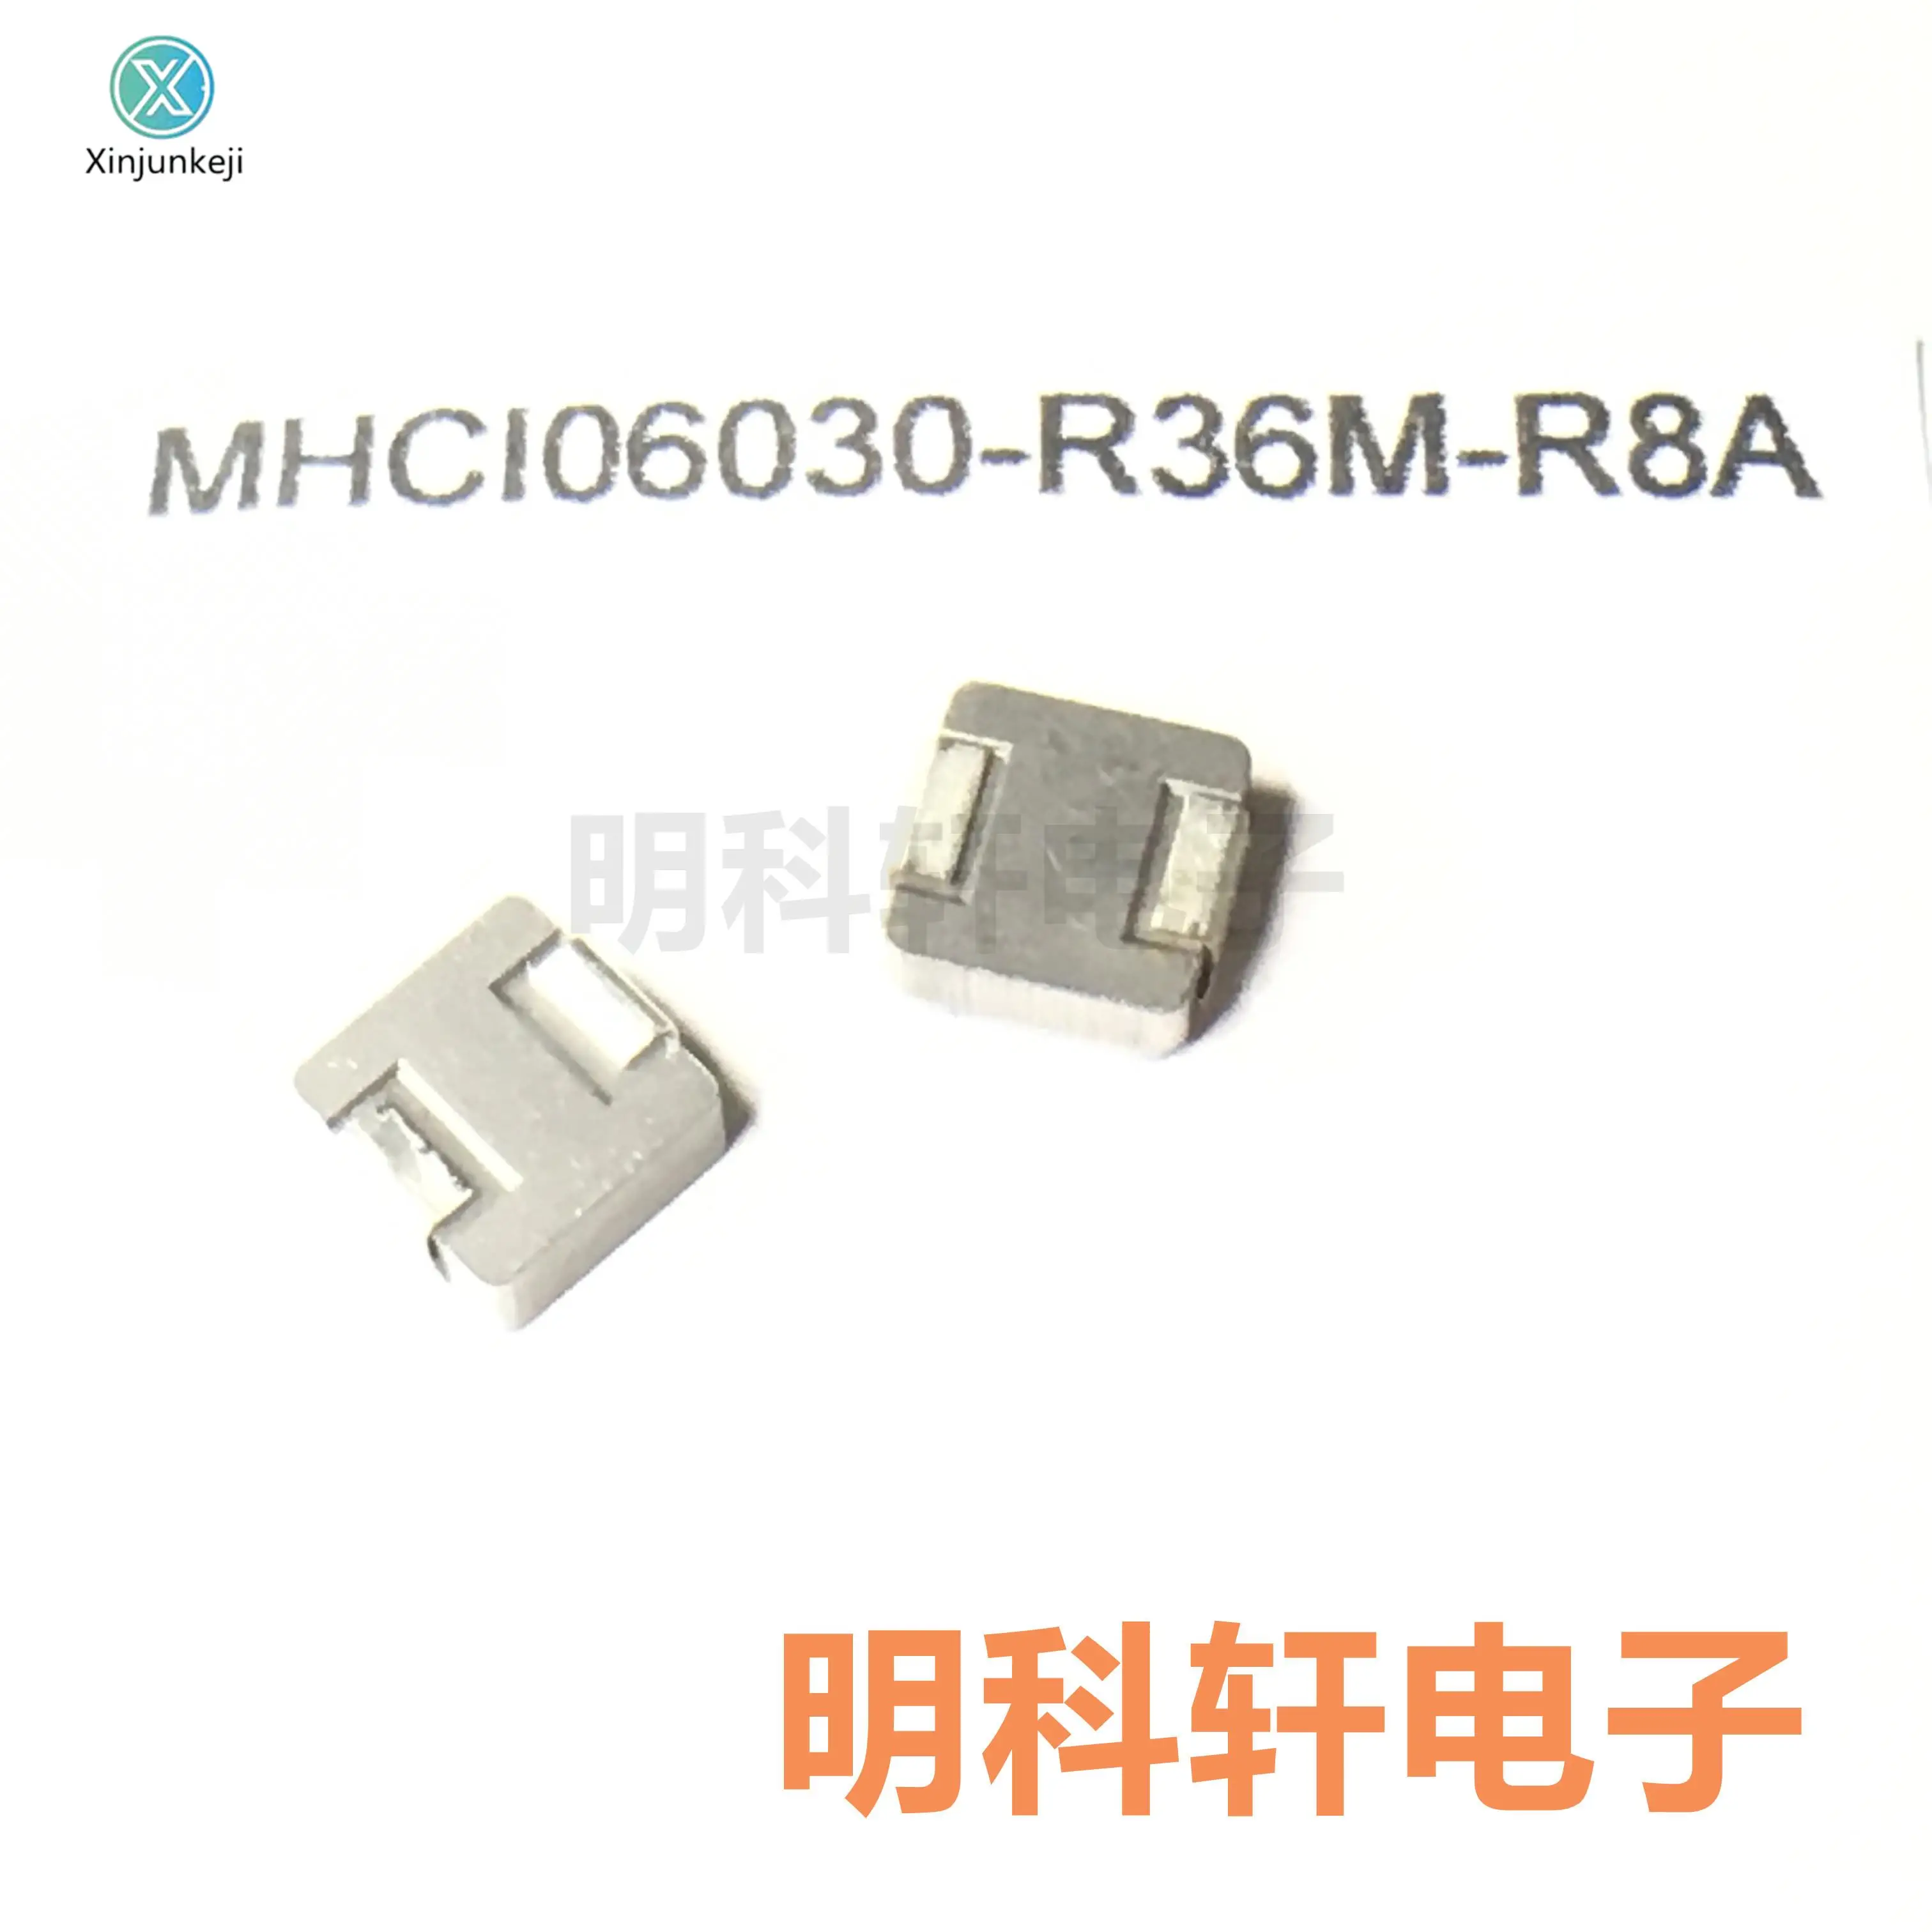 

10pcs orginal new MHCI06030-R36M-R8A SMD integrated inductor 0.36UH 7*7*3